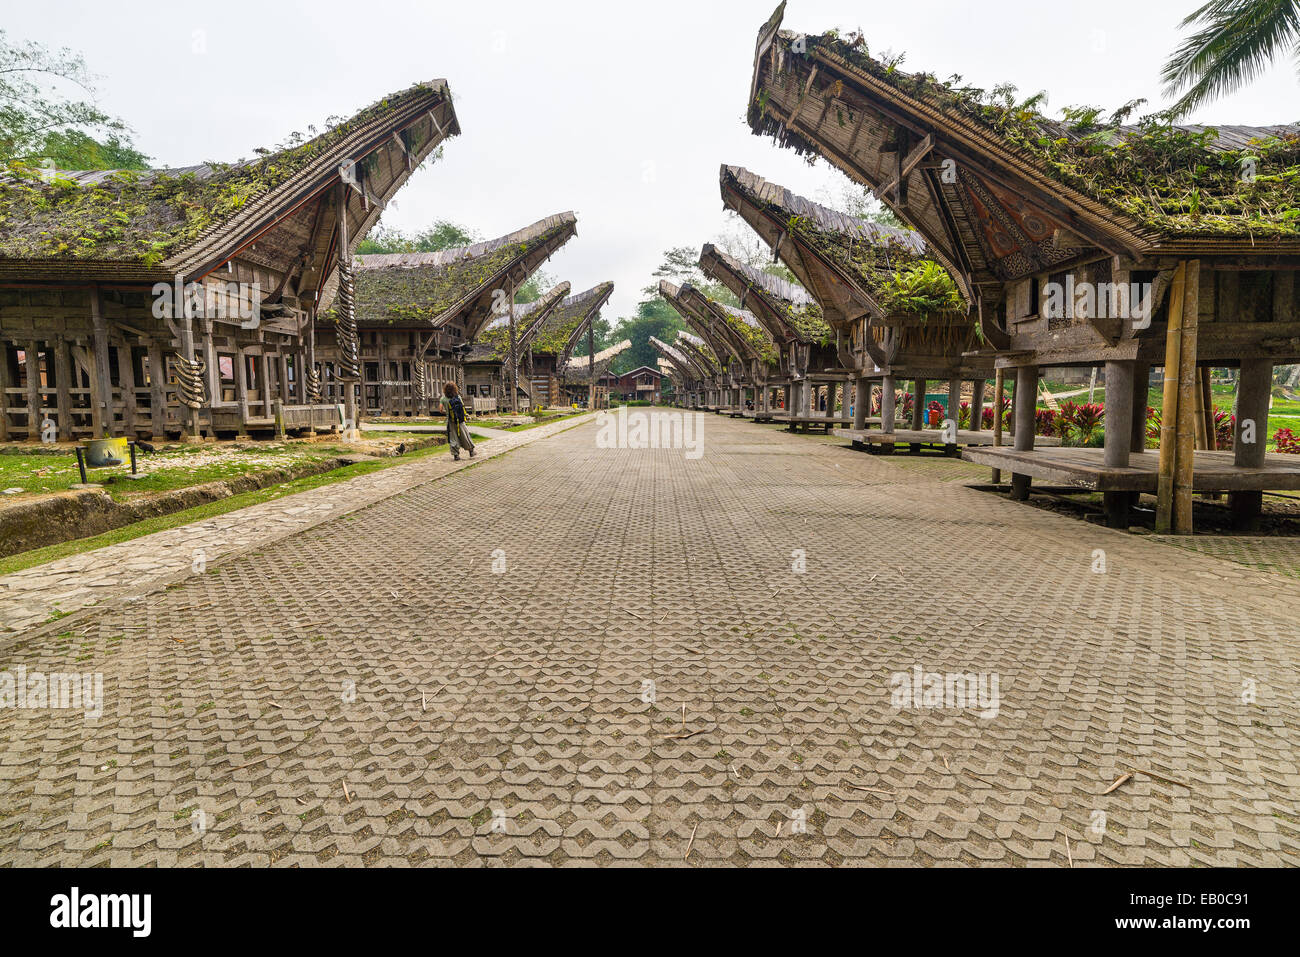 Tourist visiting traditional village with typical boat shaped roofs in Tana Toraja, South Sulawesi, Indonesia. Wide angle shot,  Stock Photo